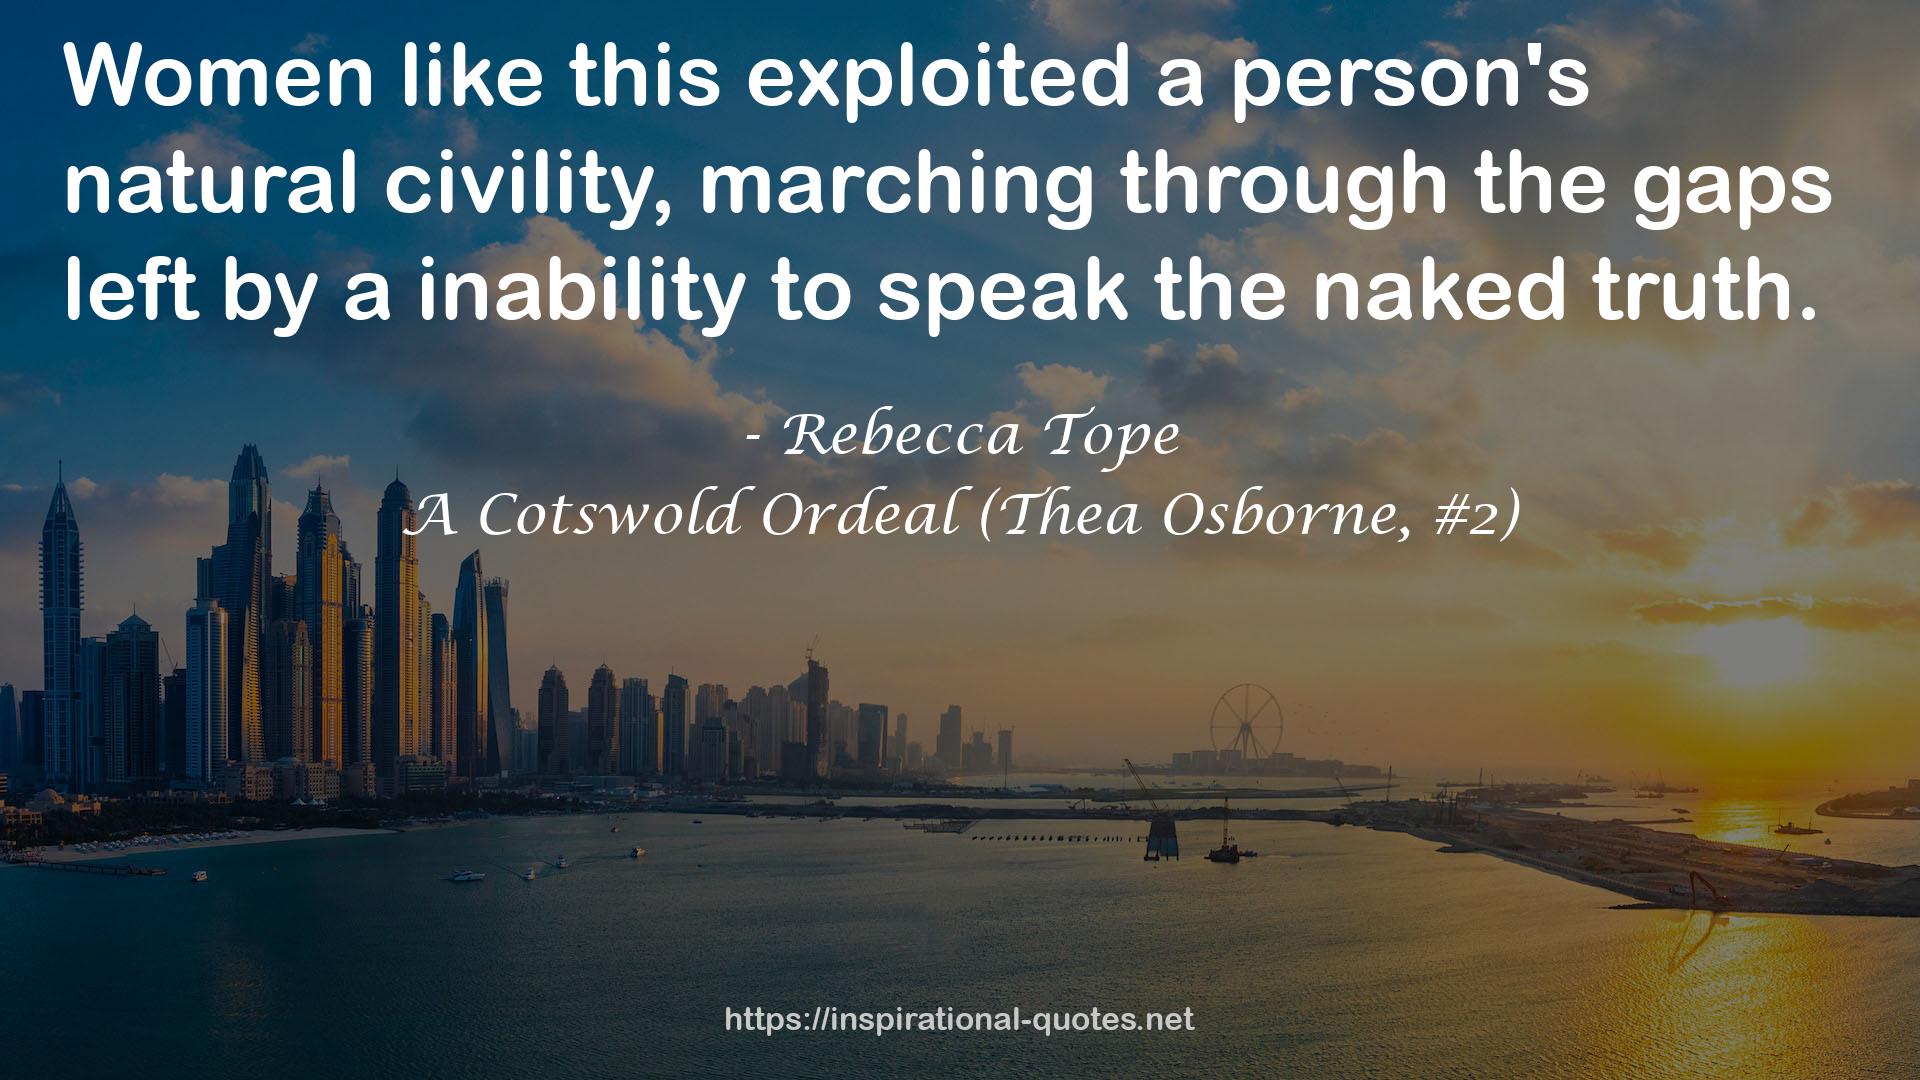 A Cotswold Ordeal (Thea Osborne, #2) QUOTES